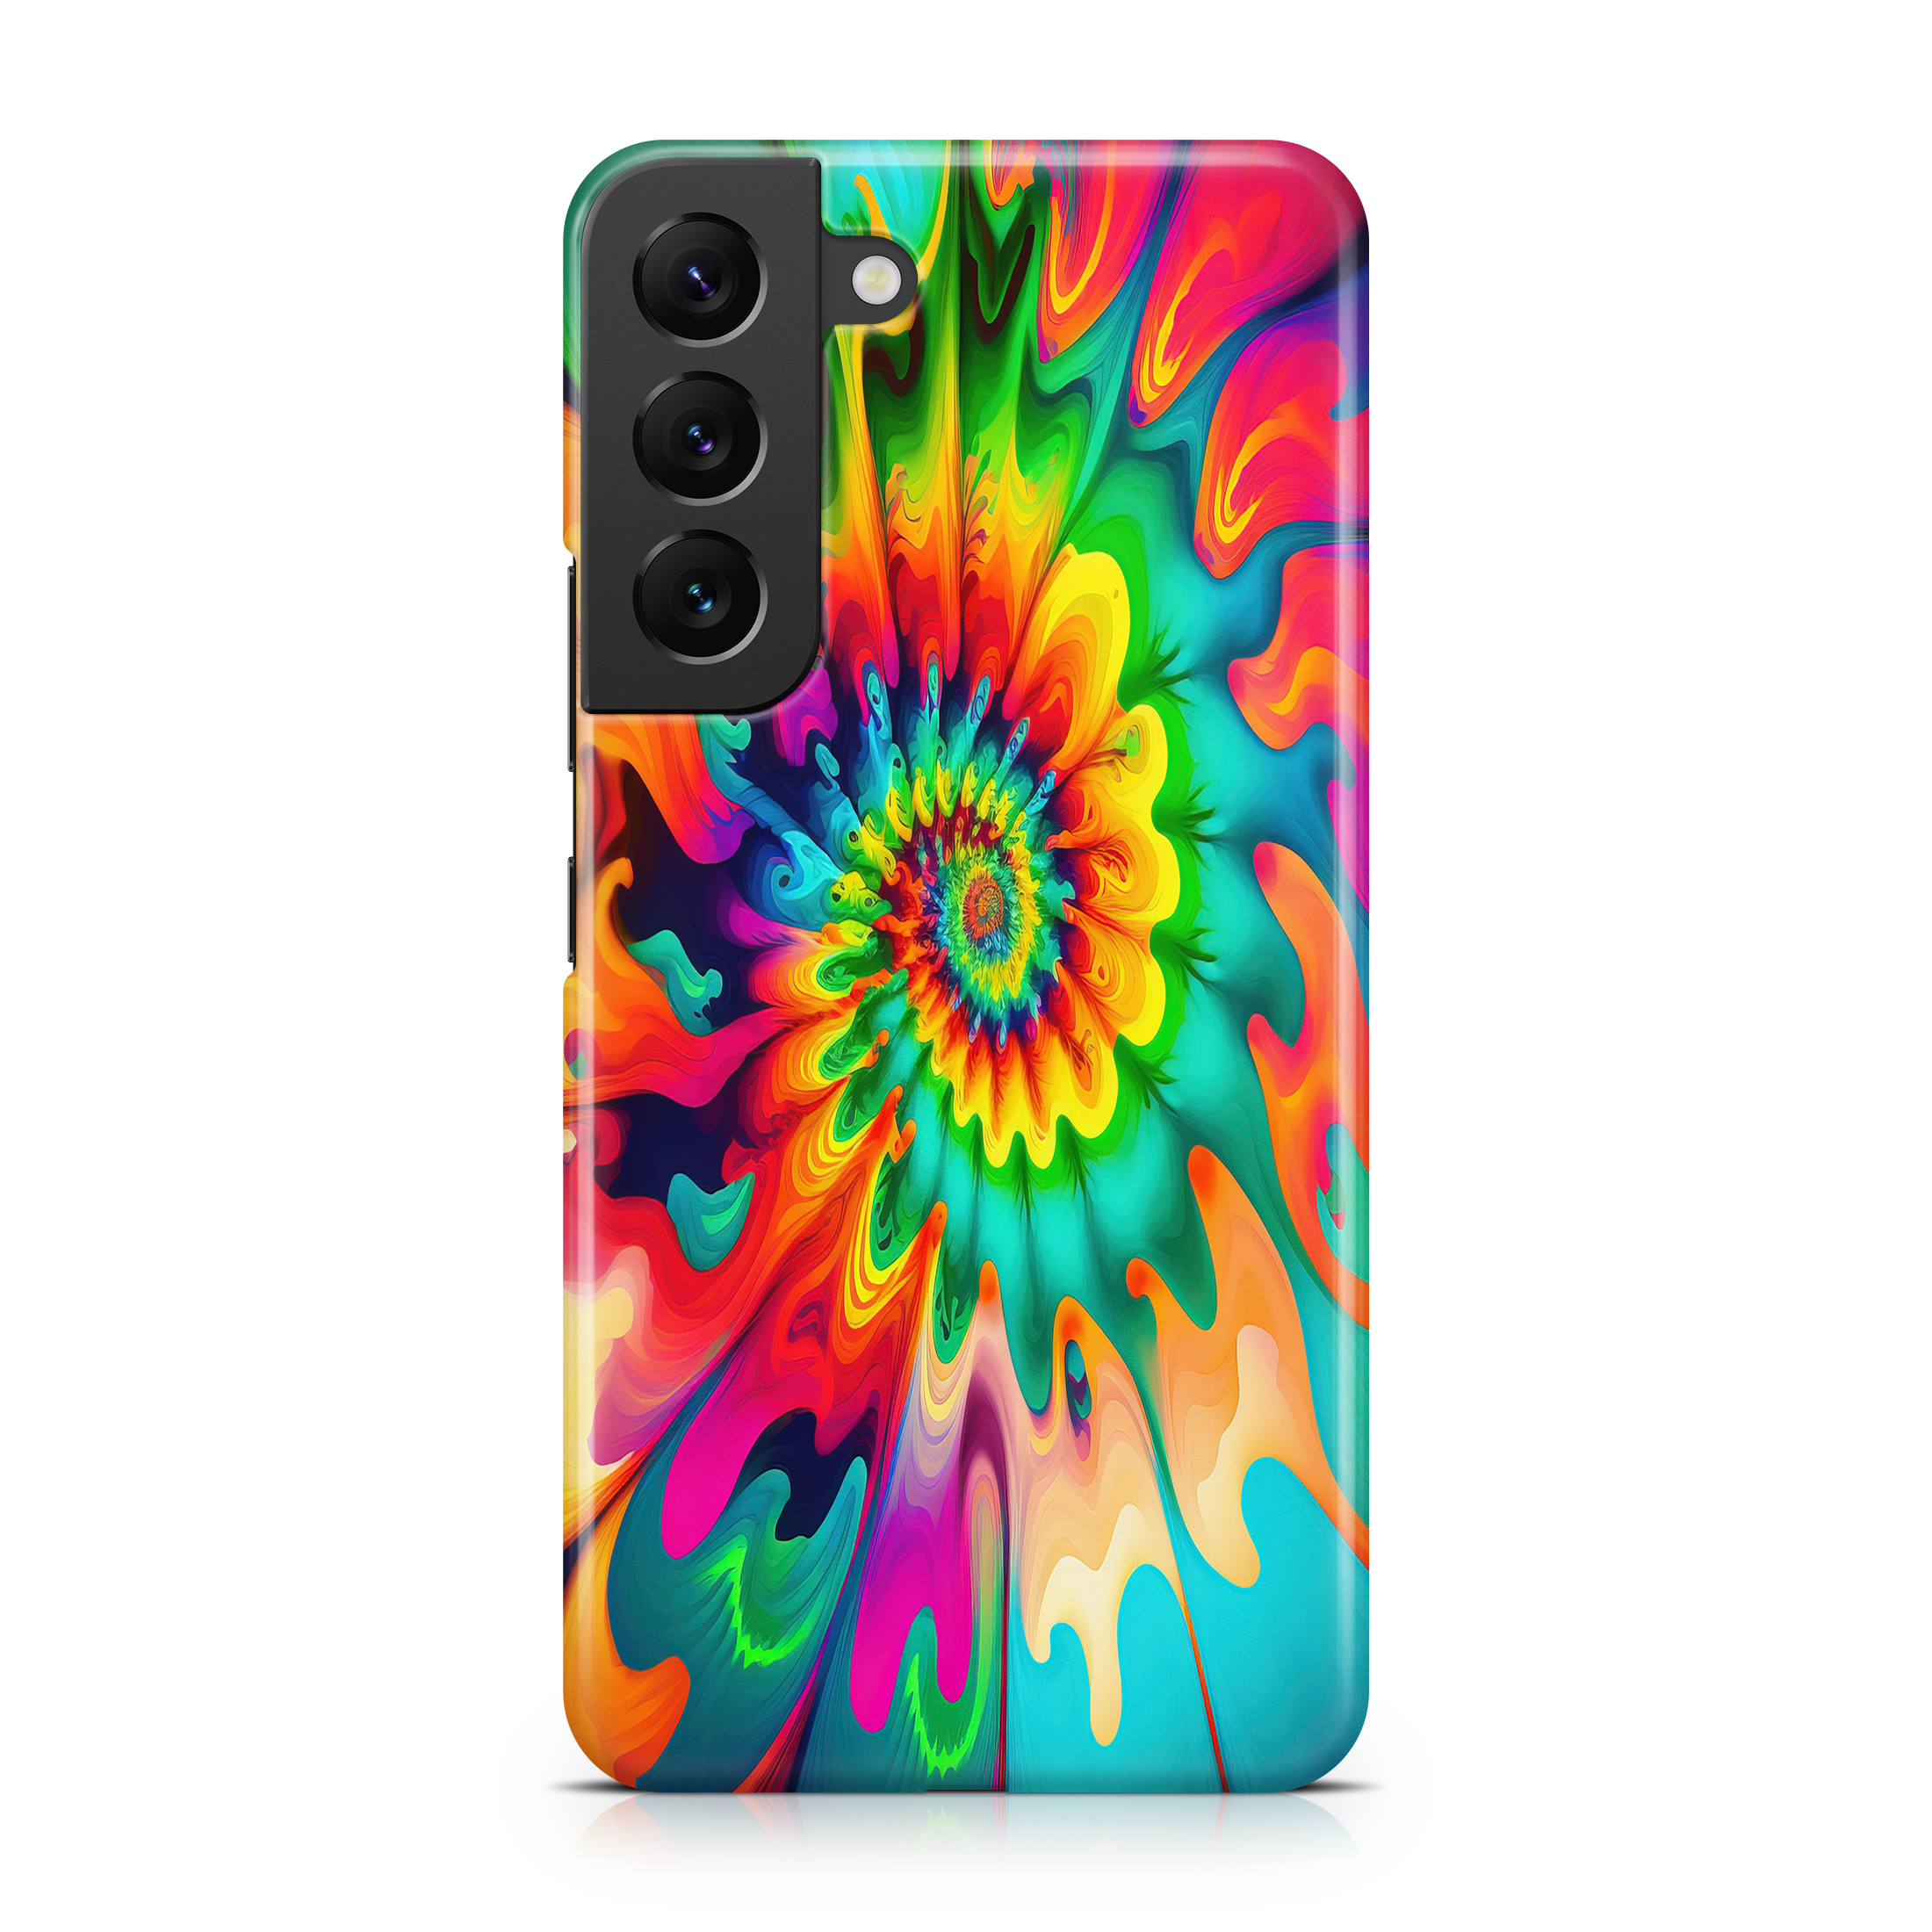 Psychedelic Tie Dye - Samsung phone case designs by CaseSwagger